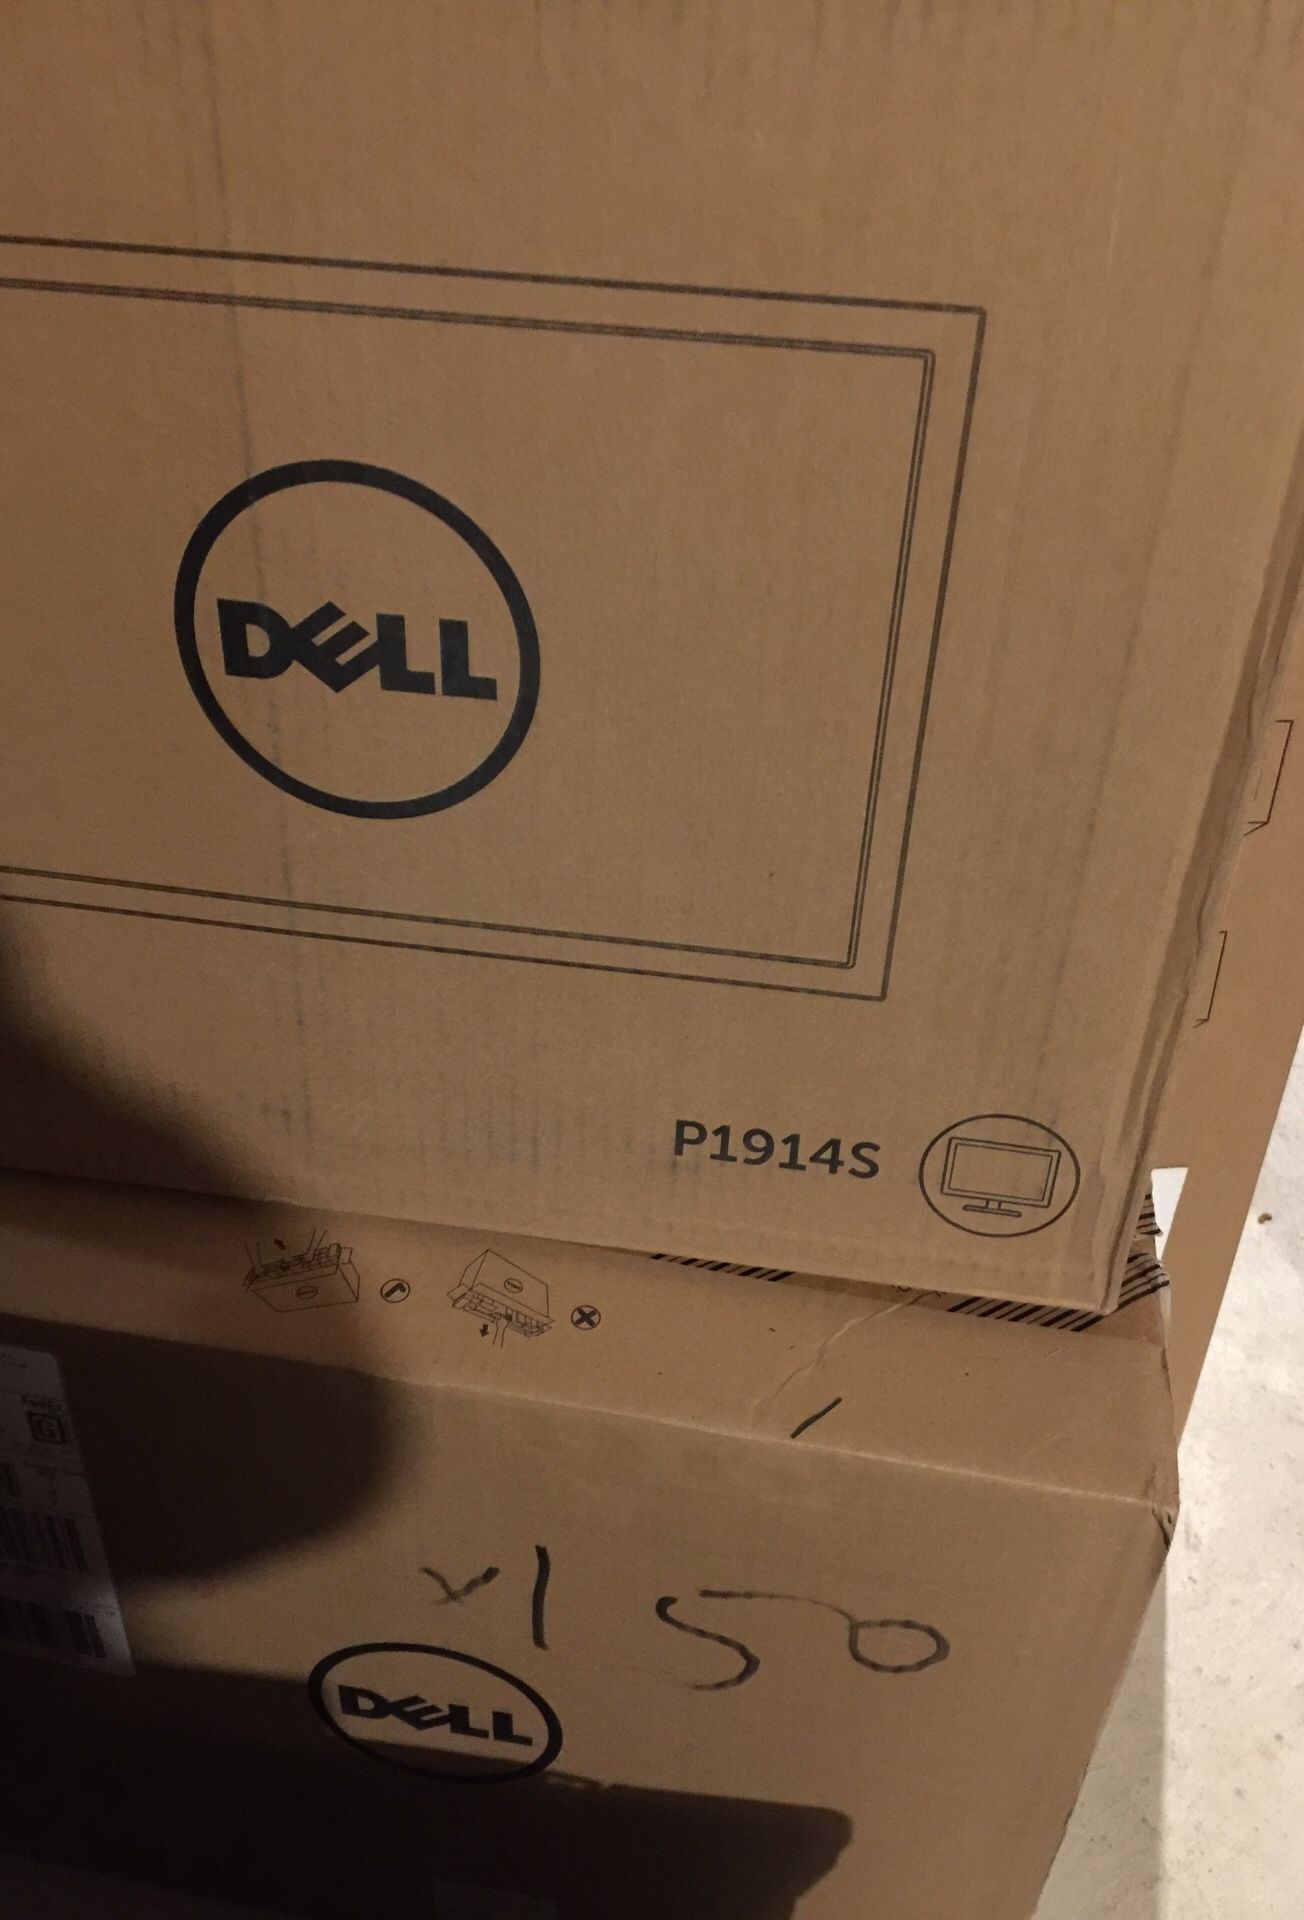 2 Dell 19” Monitors with Dell Dual Monitor Stand